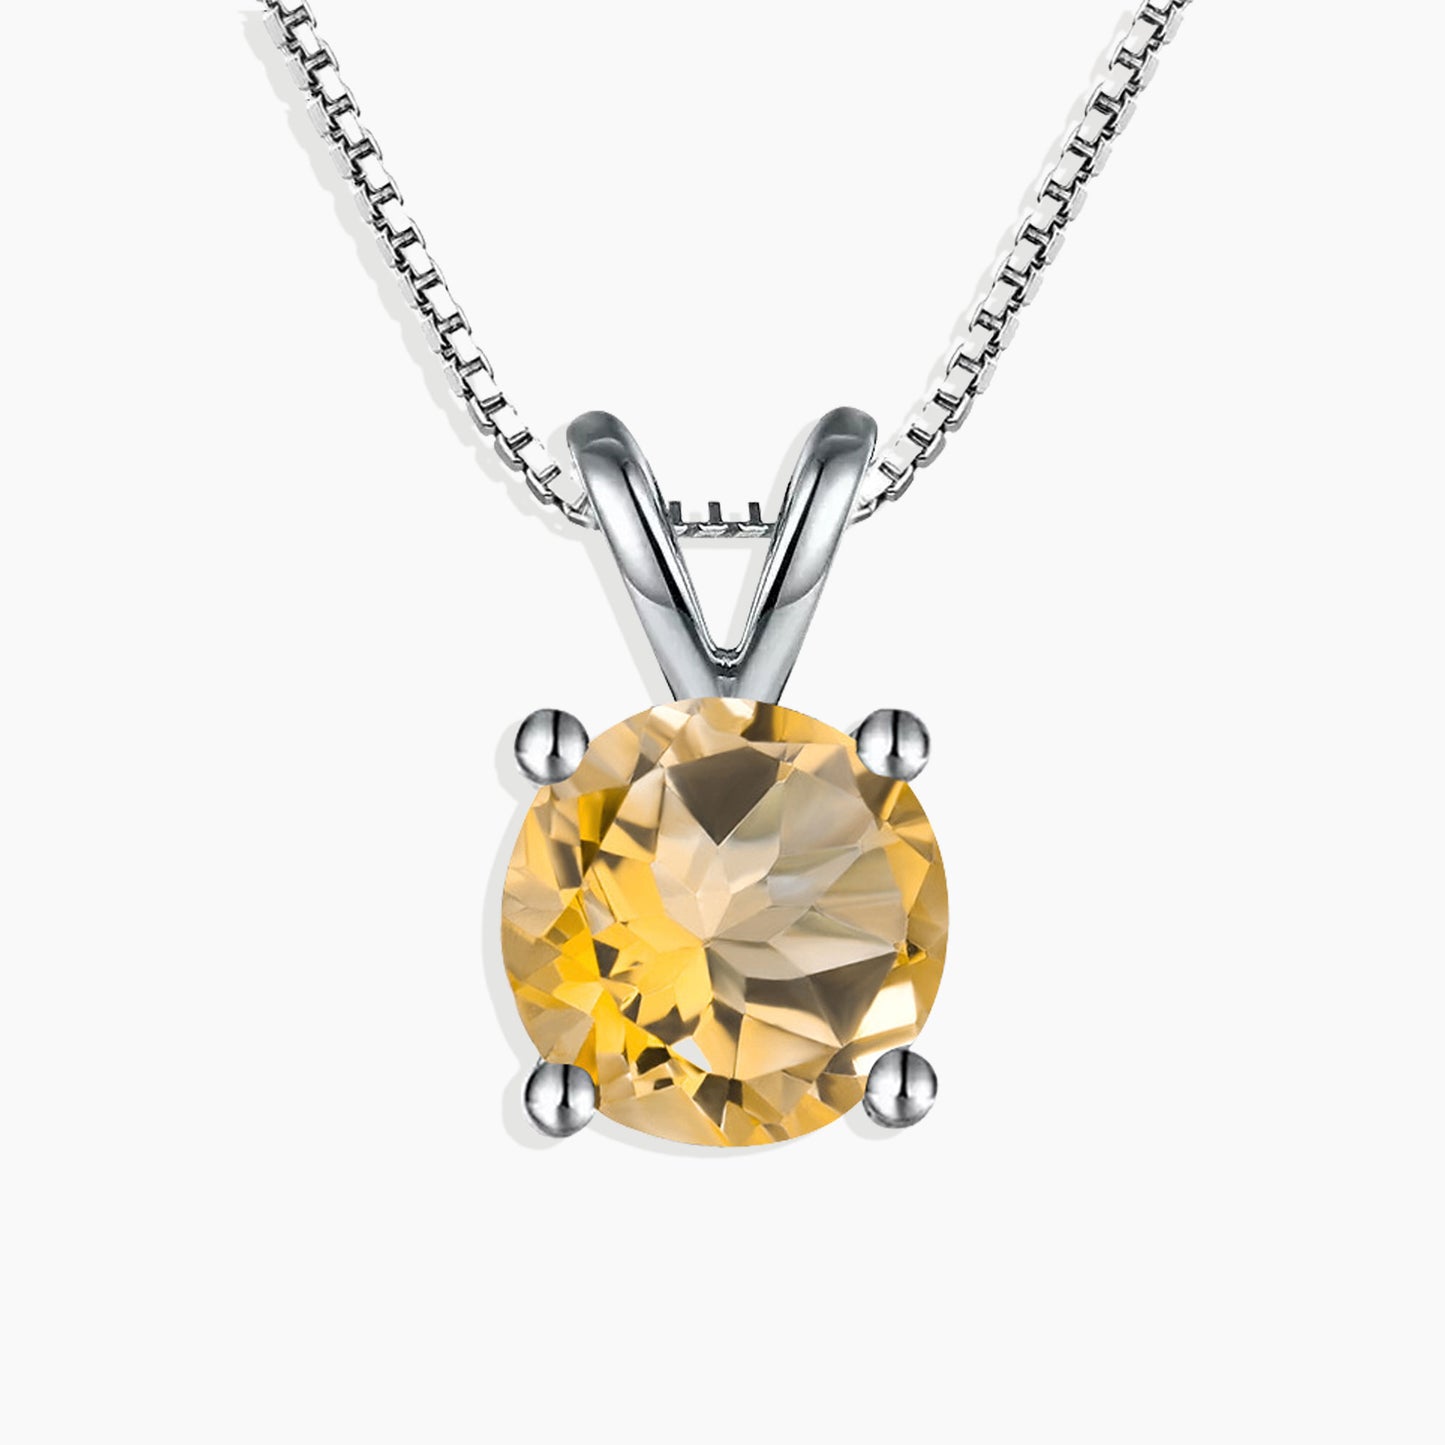 Irosk Round Cut Necklace in Sterling Silver -  Citrine